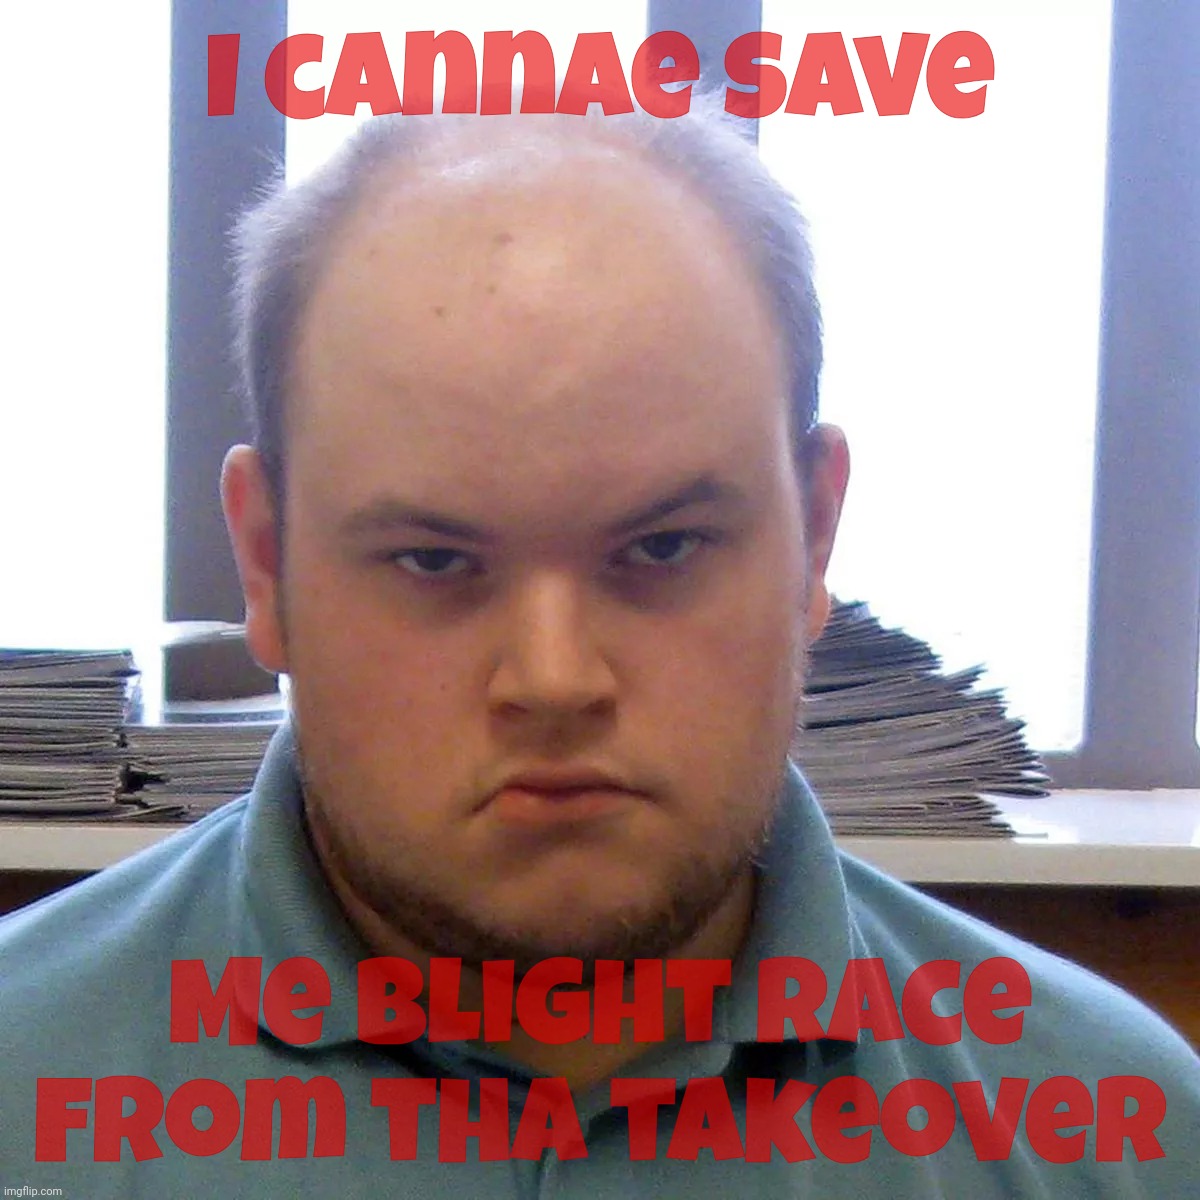 Scottish moon faced neo-Nazi aspiring terrorist and surprisingly single incel, Connor Ward, gets life for planning attacks | I cannae save; Me blight race from tha takeover | image tagged in connor ward,neo-nazi,wannabe terrorist,scotland,mysteriously unwed,uberstensch | made w/ Imgflip meme maker